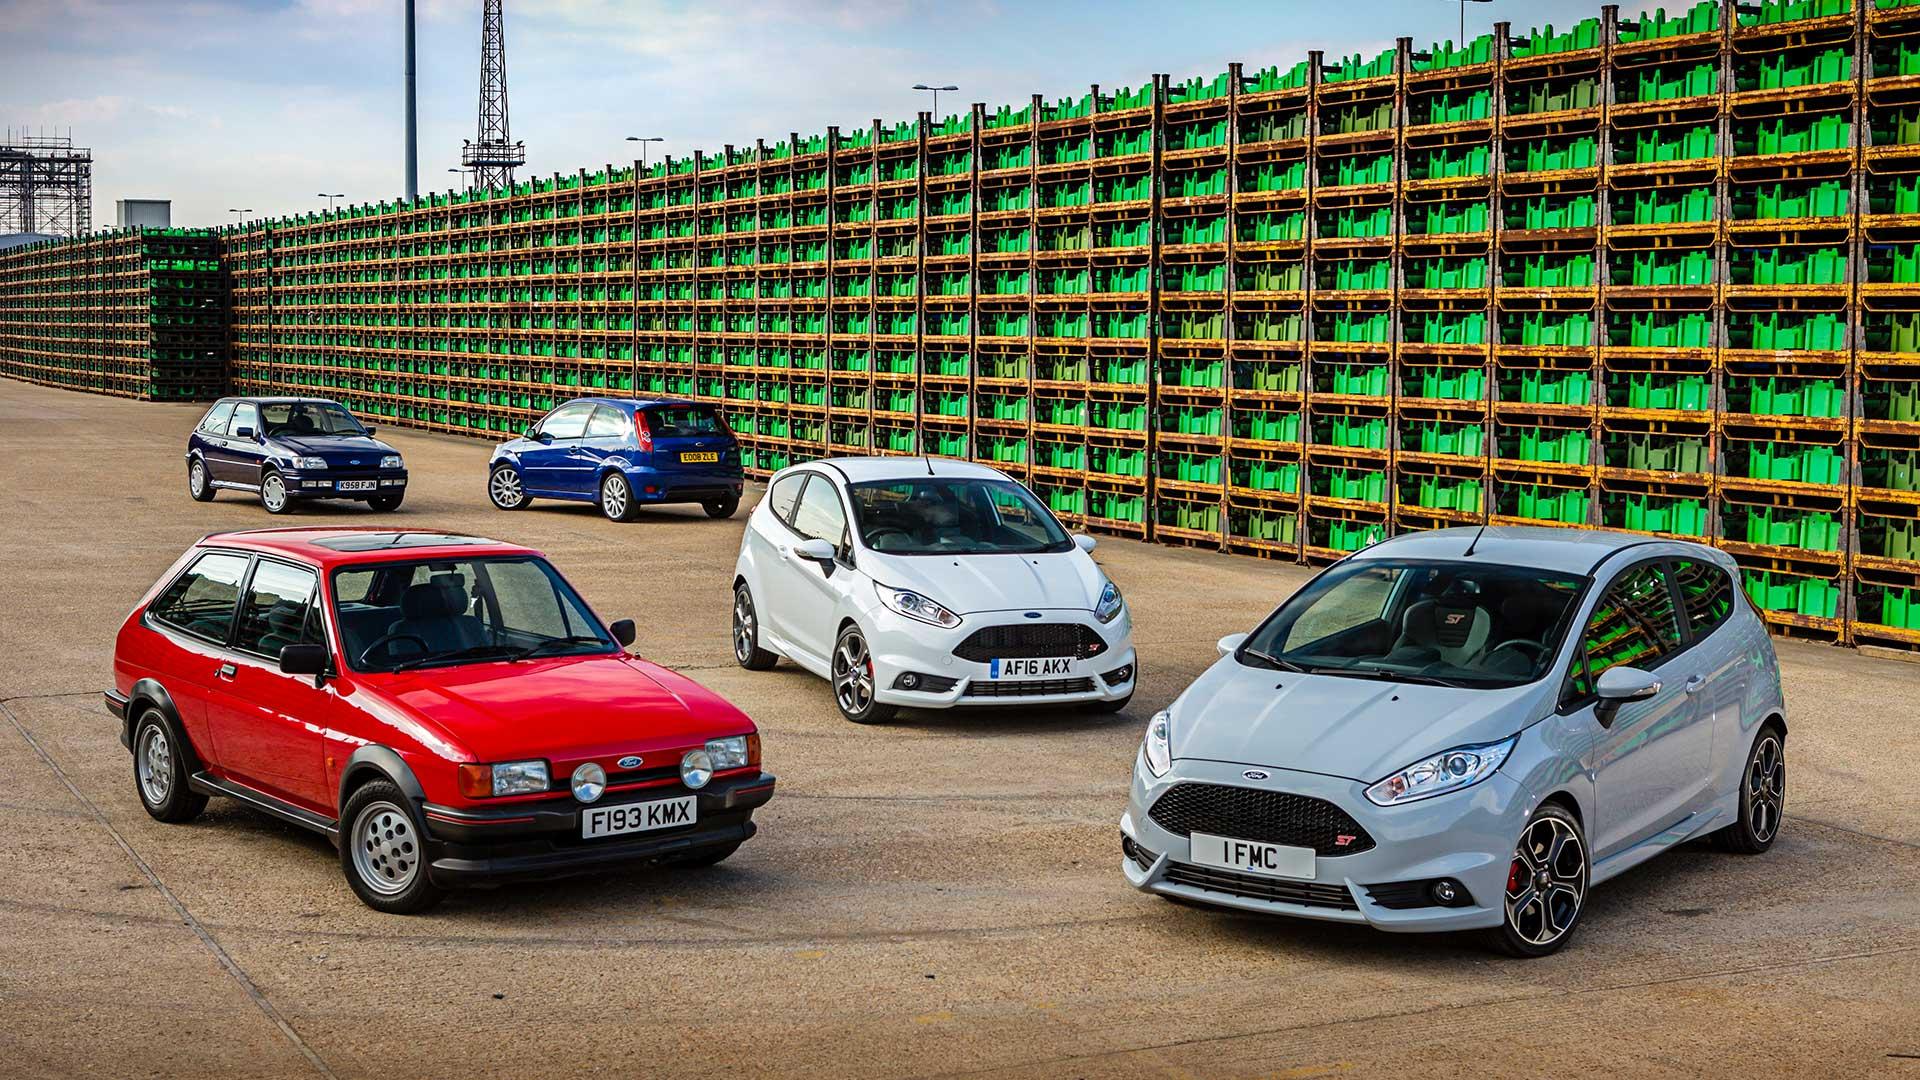 Unfortunately, production of the Ford Fiesta stopped after 47 years